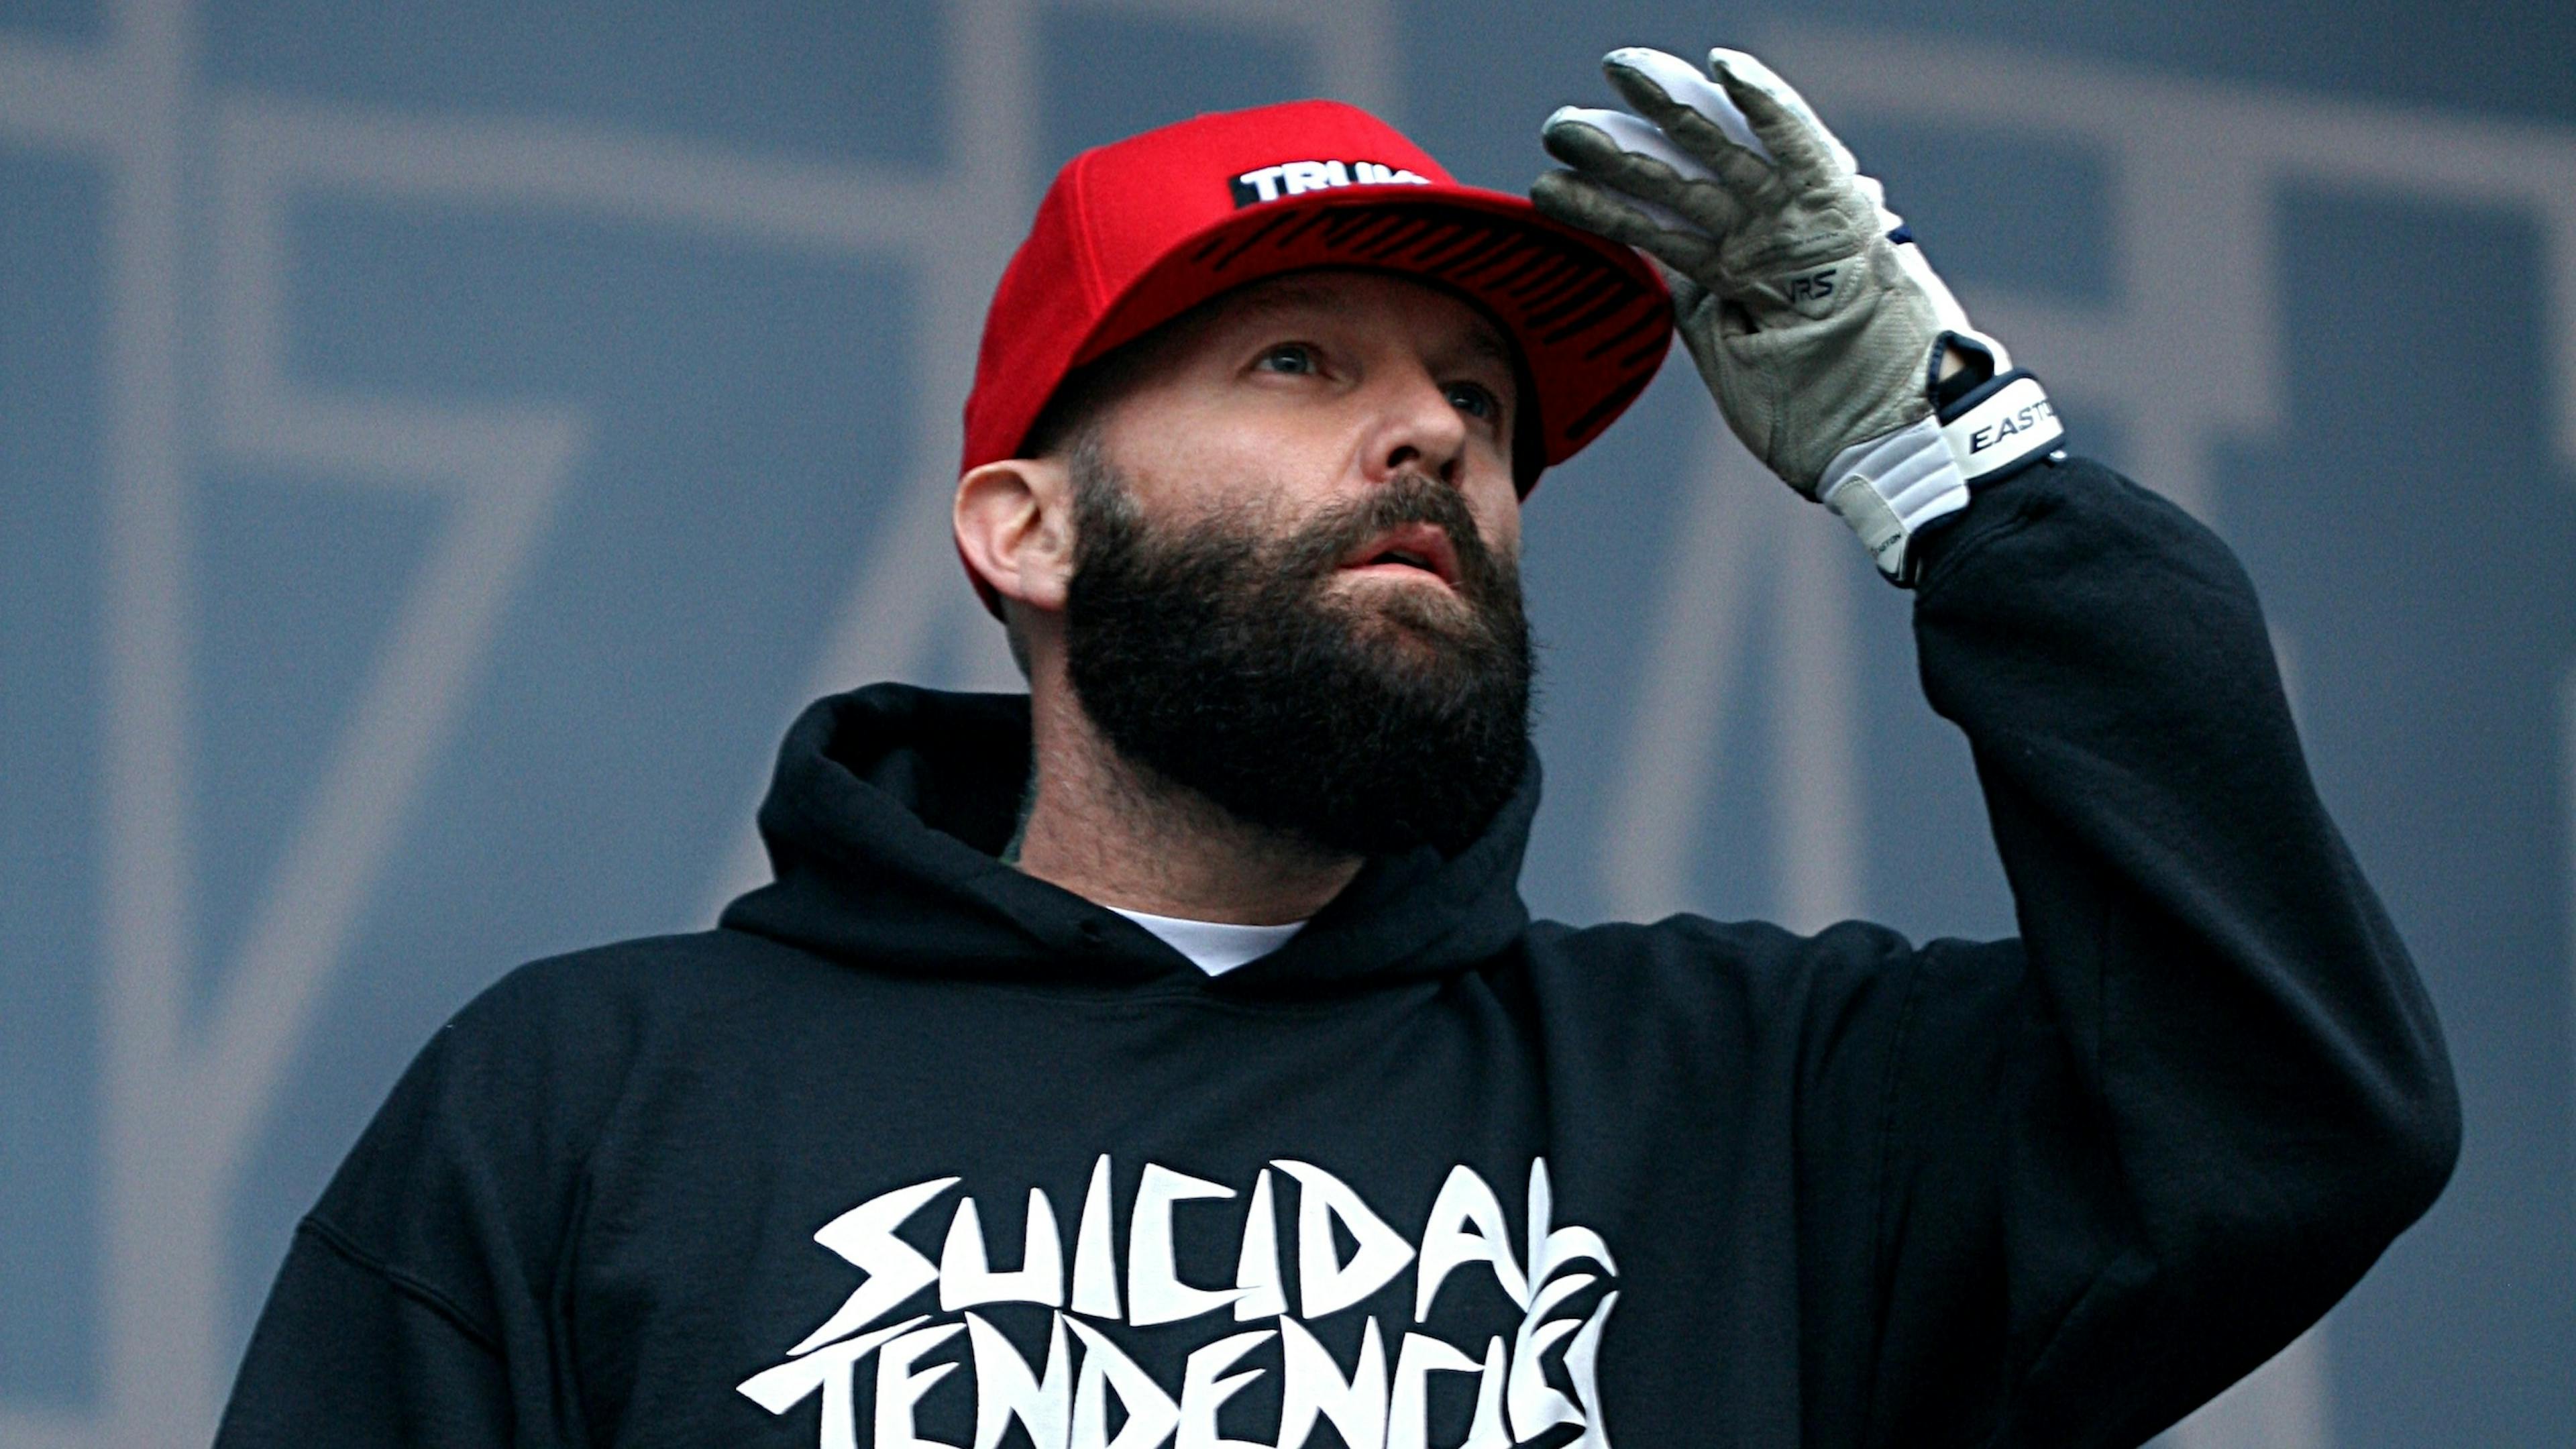 Fred Durst's House Burns Down In California Wildfires